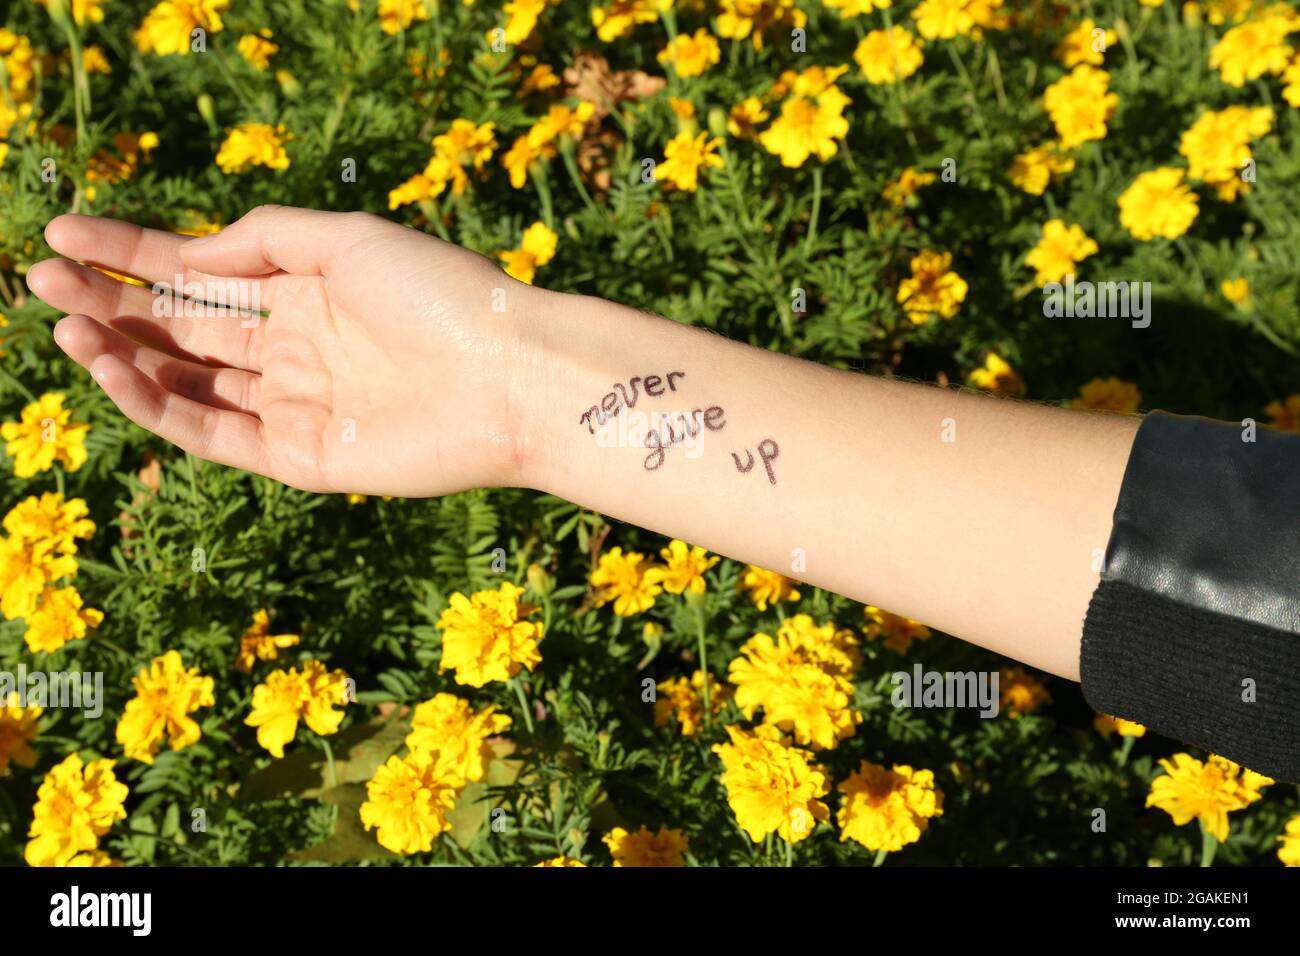 Female hand with tattoo in yellow flowers Stock Photo - Alamy